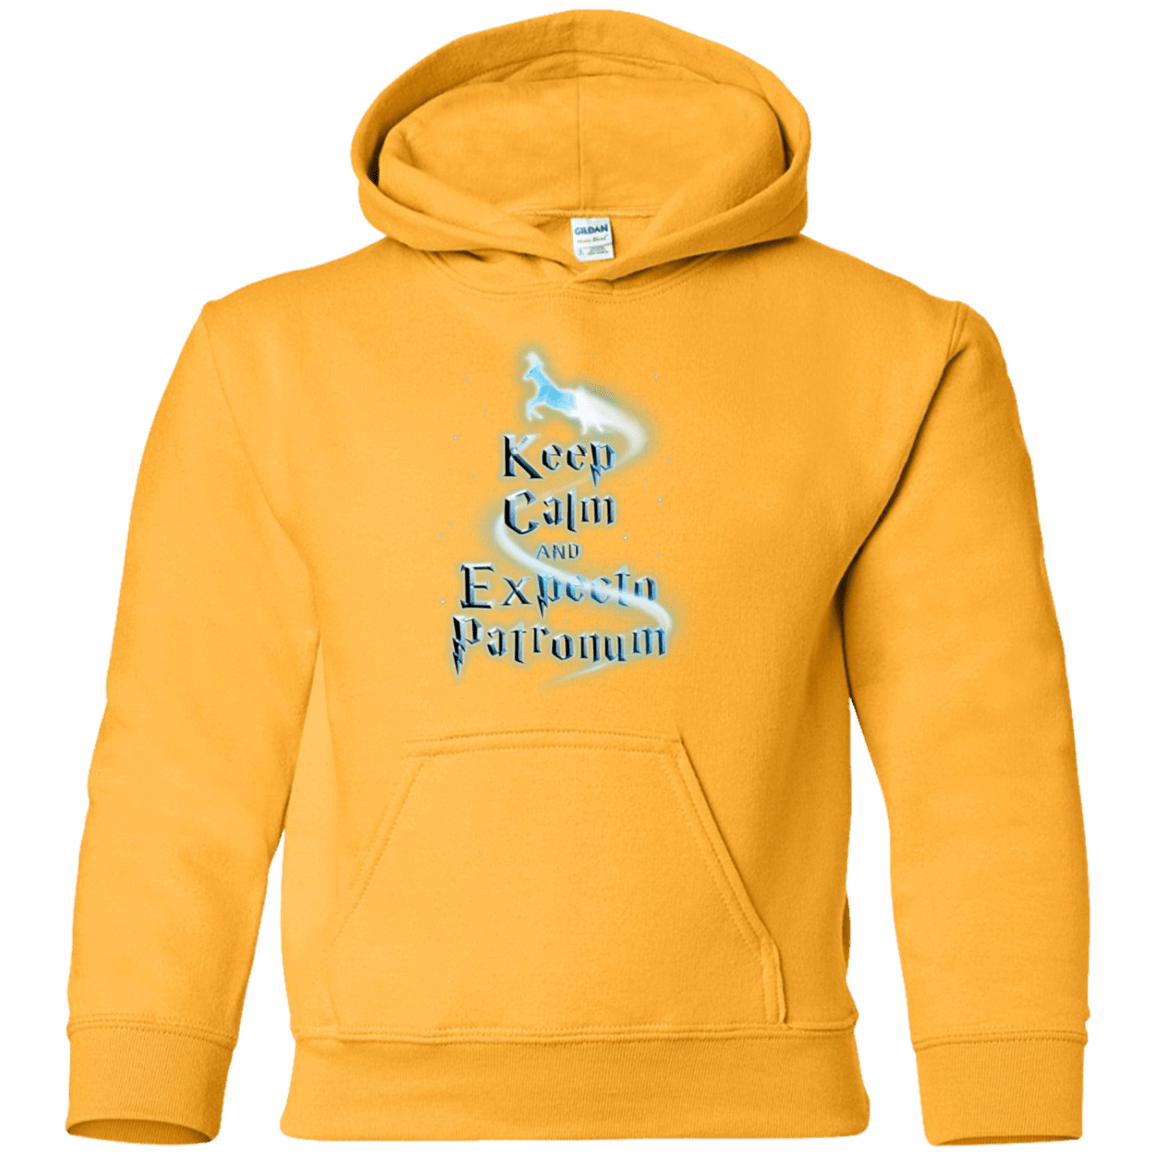 Sweatshirts Gold / YS Keep Calm and Expecto Patronum Youth Hoodie